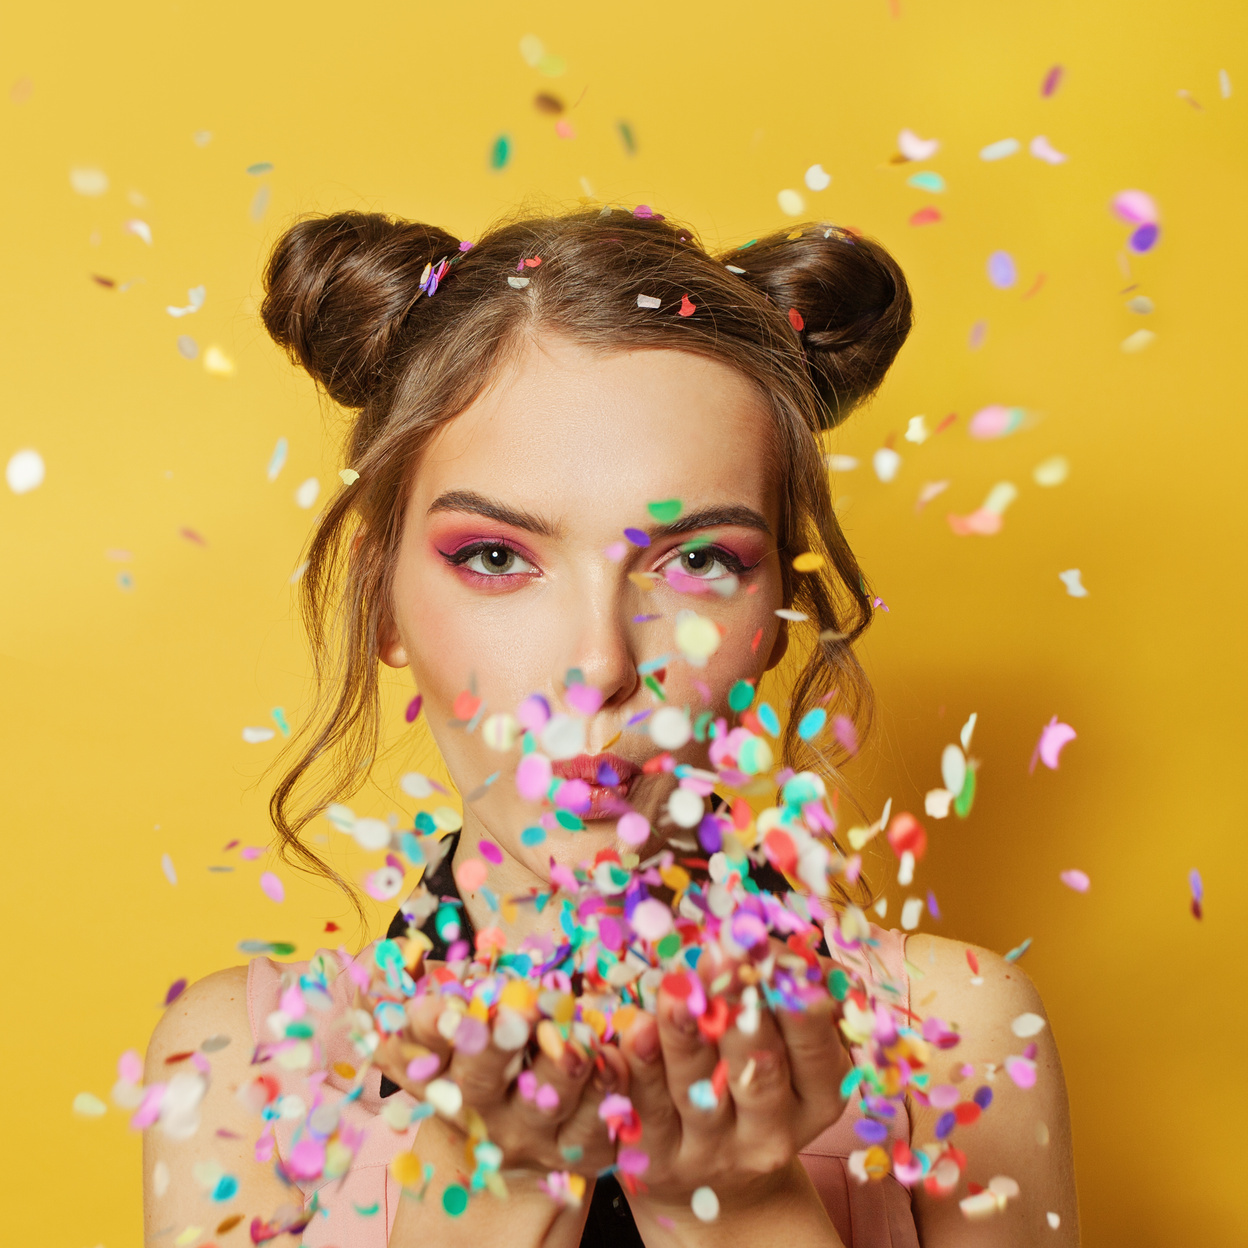 A beautiful woman blowing confetti while celebrating. Find people who want to meet, match, and mingle with you on buddypassgo.com! 